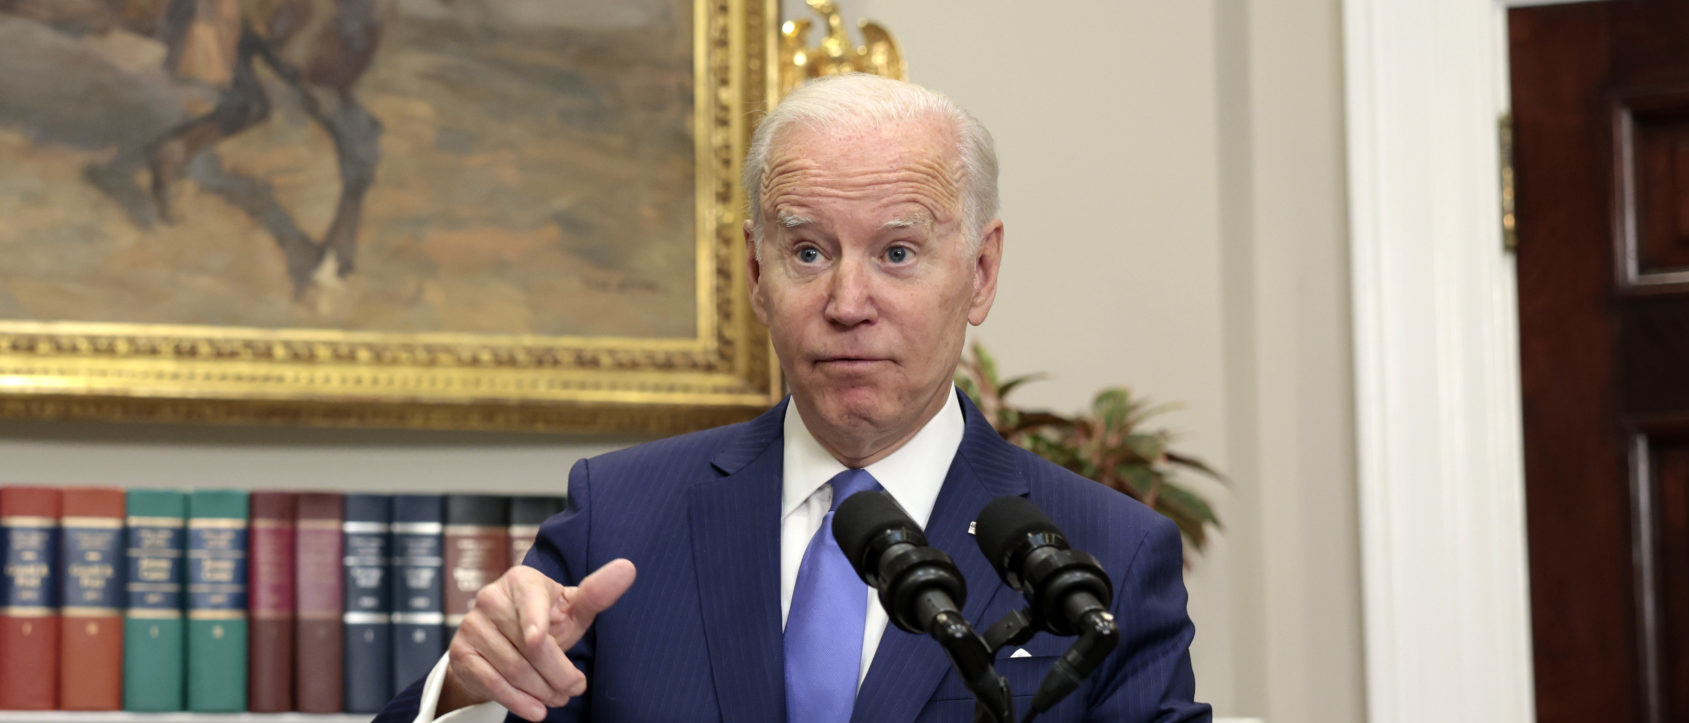 WASHINGTON, DC - APRIL 28: U.S. President Joe Biden gestures as he gives remarks on providing additional support to Ukraine’s war efforts against Russia from the Roosevelt Room of the White House on April 28, 2022 in Washington, DC. Alongside a new supplemental aid request to the U.S. Congress, President Biden proposed turning assets from Russian oligarchs seized through sanctions into funding to rebuild Ukraine. (Photo by Anna Moneymaker/Getty Images)